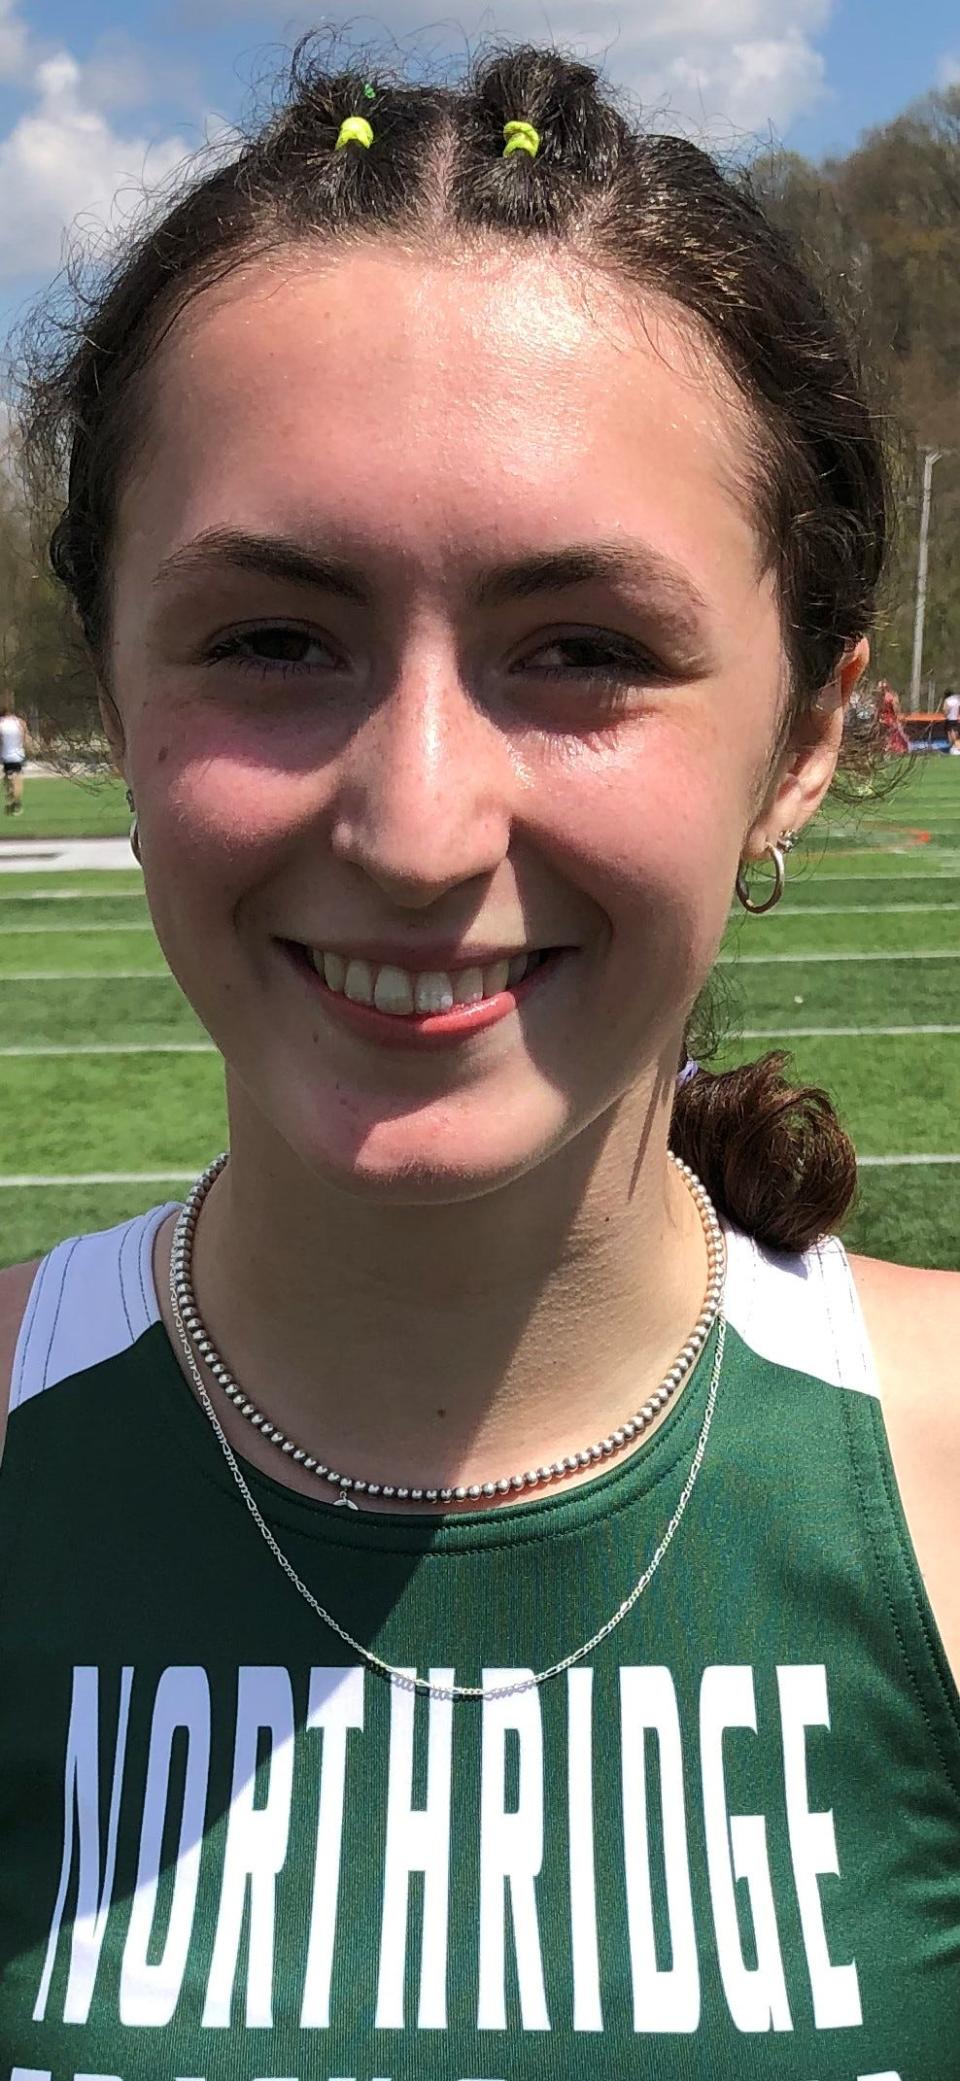 Northridge senior Colette Patti won the 100 in :12.46 on Saturday at Heath's Hank Smith Invitational, also taking second in the 200 and running on a pair of second-place relays.